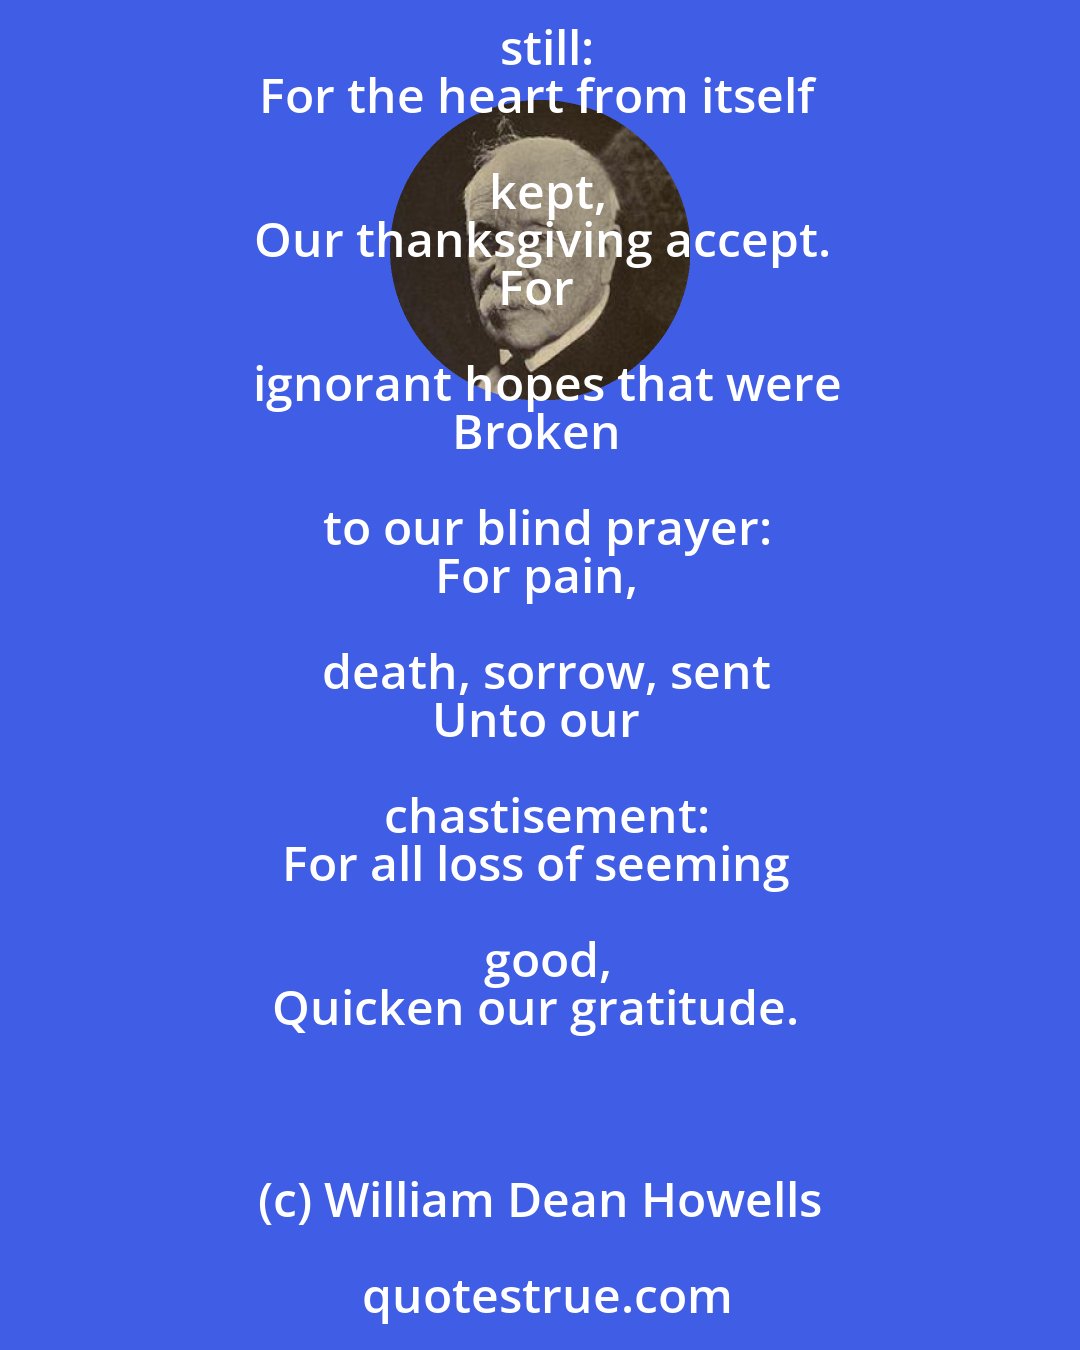 William Dean Howells: Lord, for the erring thought
Not unto evil wrought:
Lord, for the wicked will
Betrayed, and baffled still:
For the heart from itself kept,
Our thanksgiving accept.
For ignorant hopes that were
Broken to our blind prayer:
For pain, death, sorrow, sent
Unto our chastisement:
For all loss of seeming good,
Quicken our gratitude.